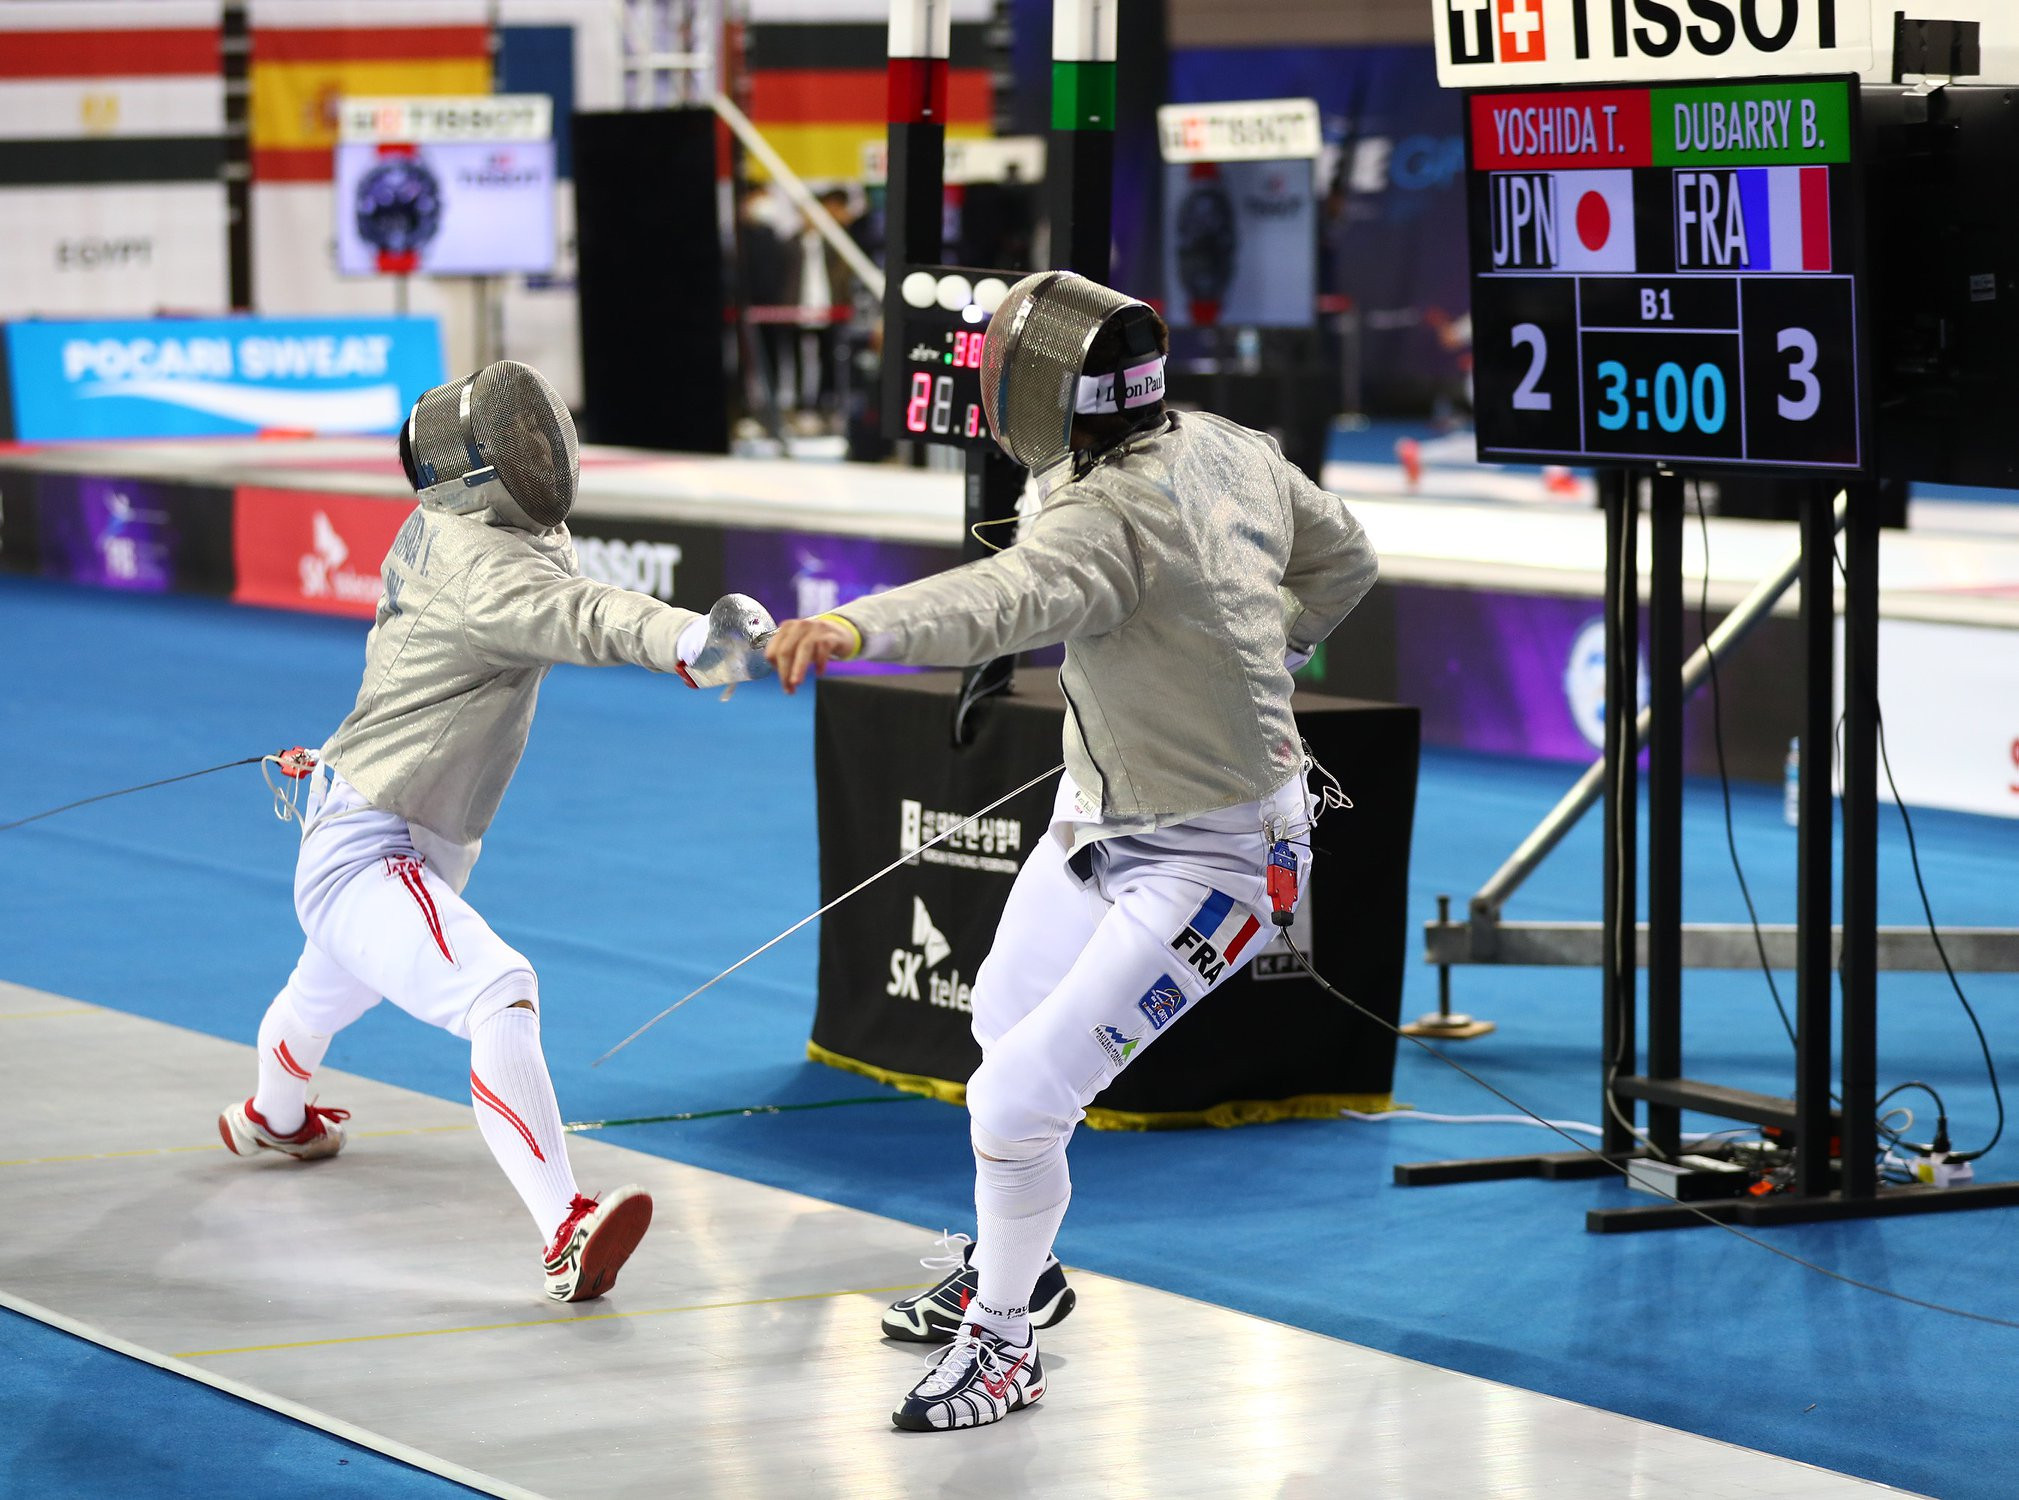 The men’s competition begun today at the FIE Sabre Grand Prix in Seoul ©FIE/Facebook/Manky/Bizzi